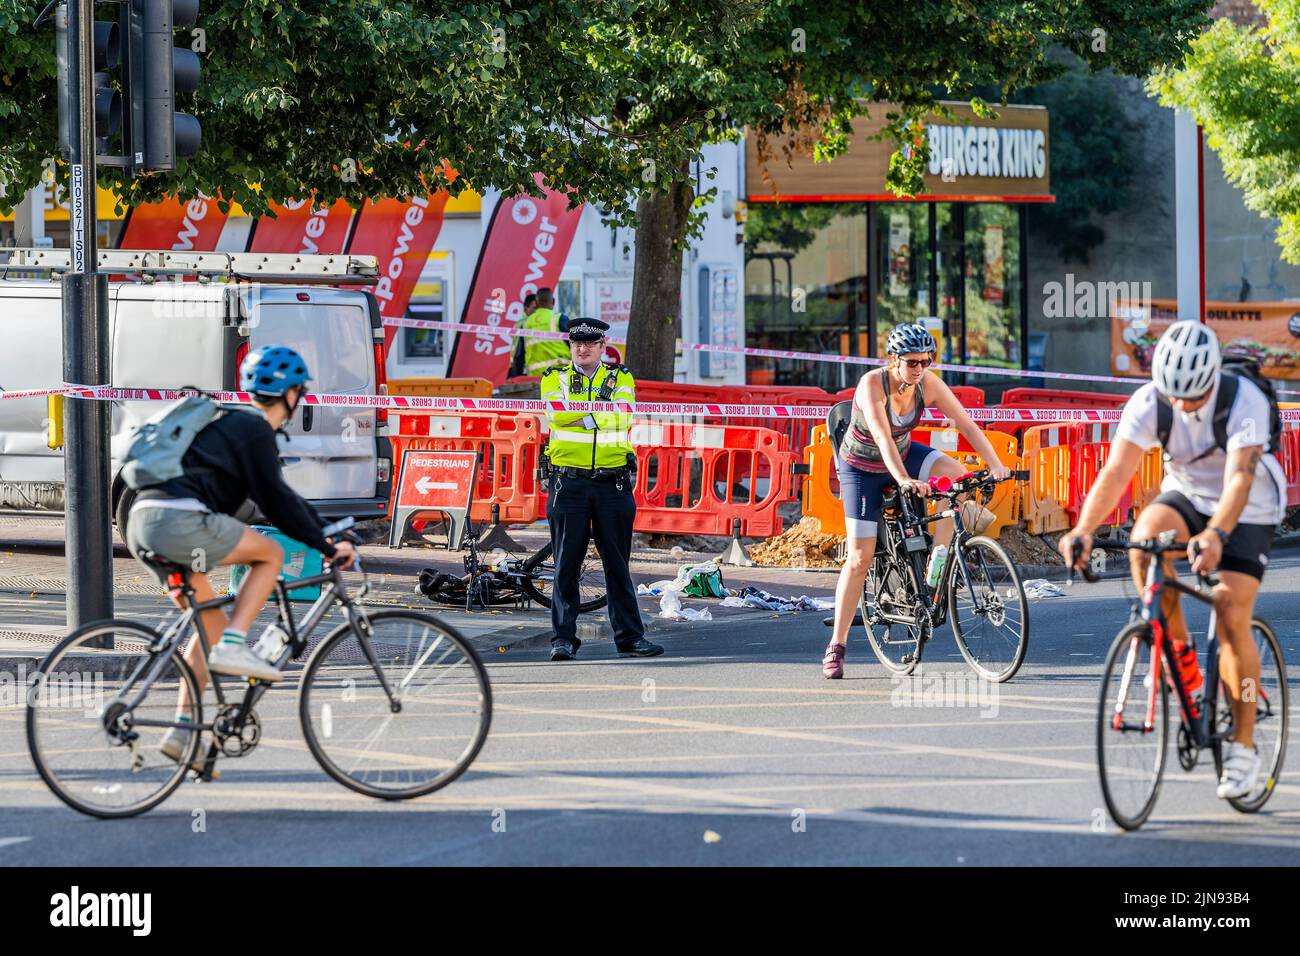 London, UK. 10th Aug, 2022. Police block Balham Hill after a deliveroo rider hits a van outside the Shell petrol station. According to a witness the rider was not wearing a helmet and suffered a head injury. Credit: Guy Bell/Alamy Live News Stock Photo